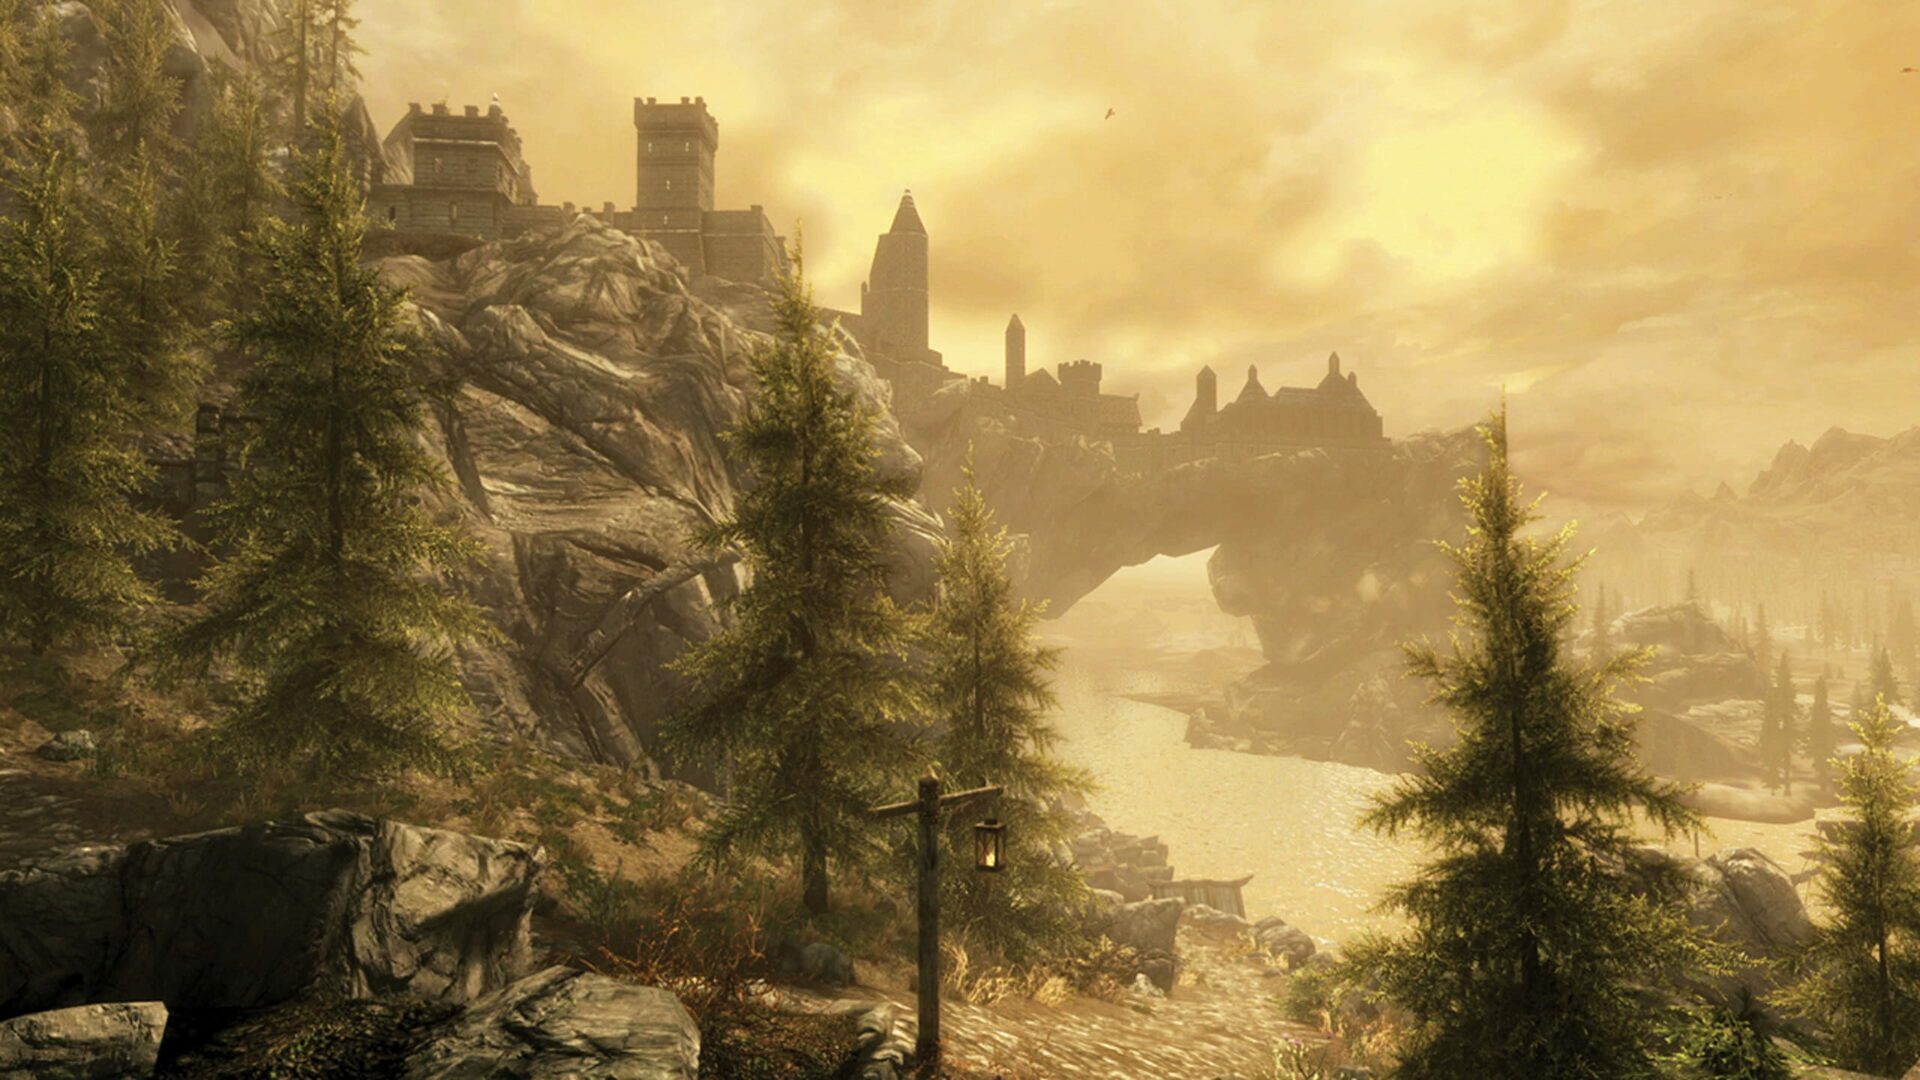 view of the city and mountain area in skyrim